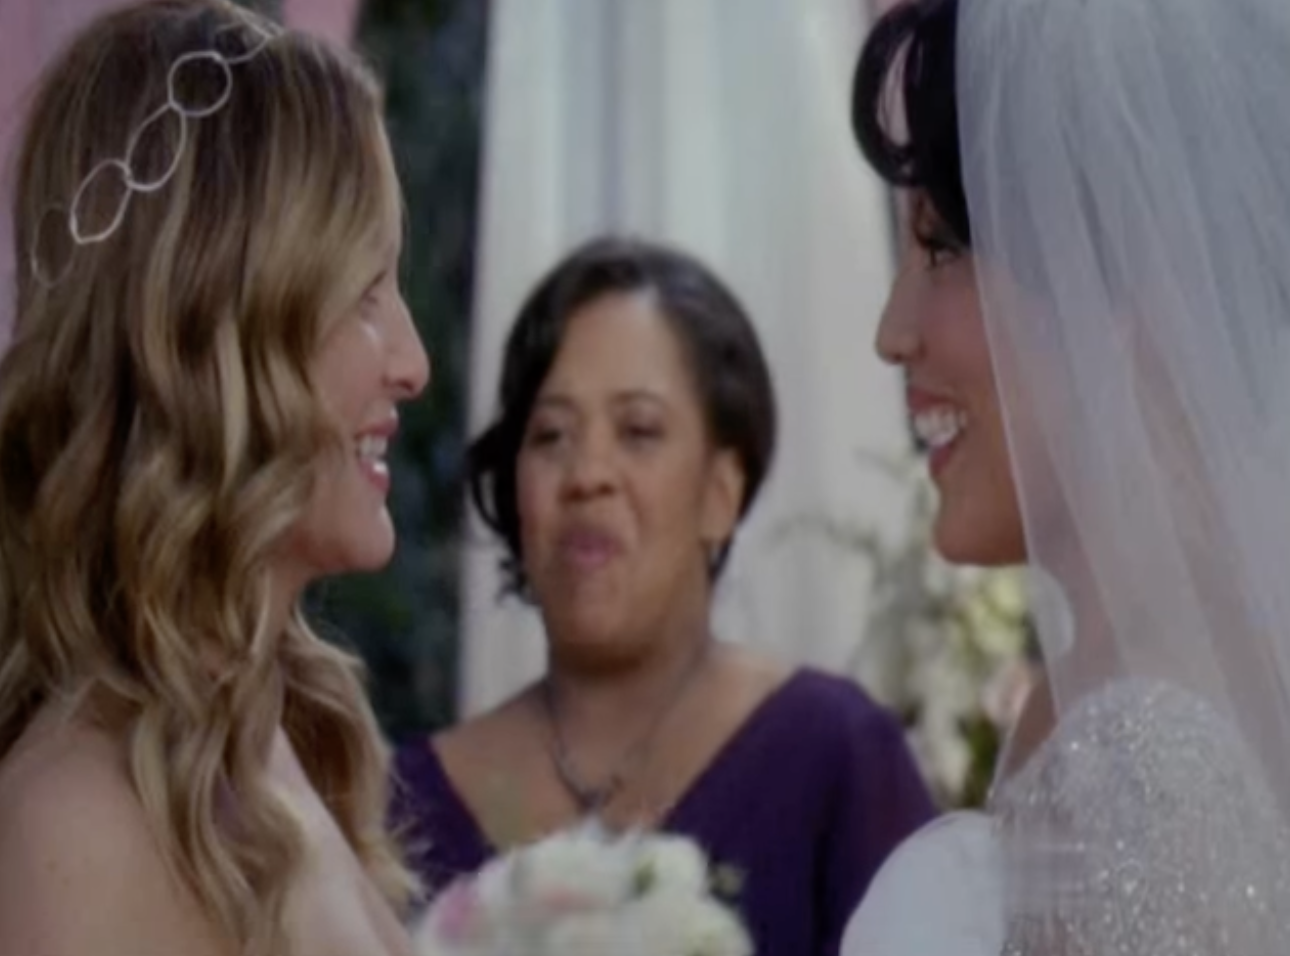 Callie, wearing a veil, and Arizona, holding flowers, stand face to face smiling, as Bailey is seen officiating between them in the background